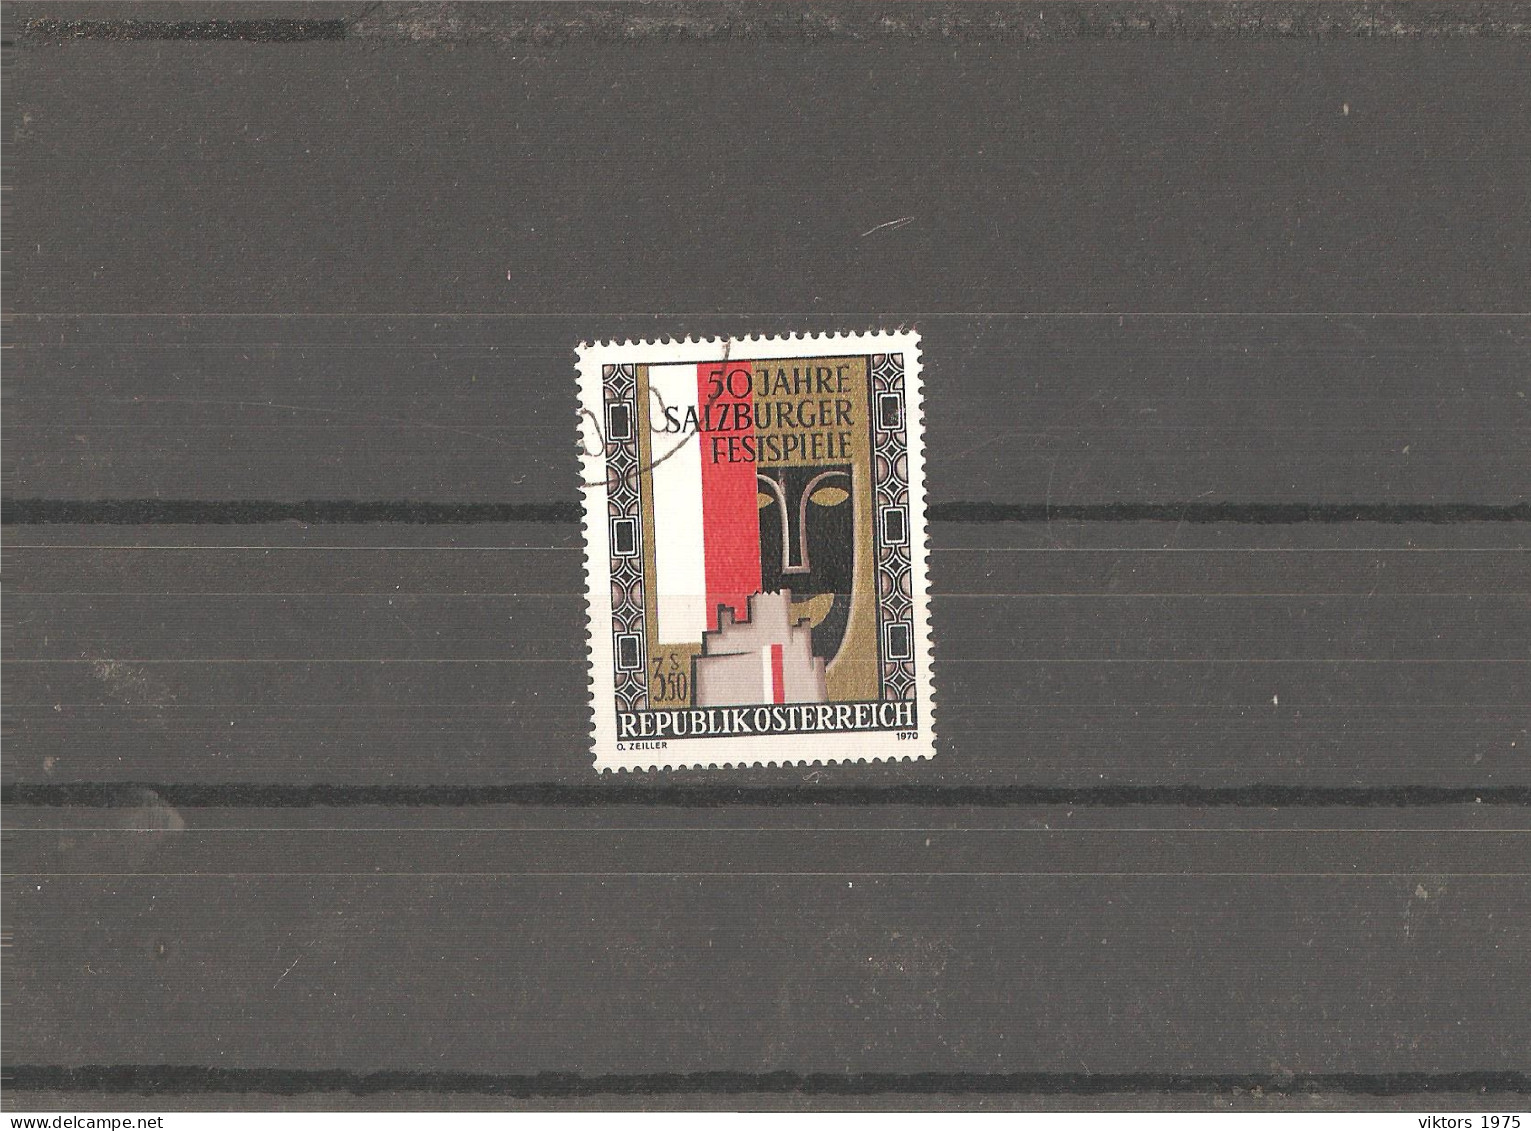 Used Stamp Nr.1335 In MICHEL Catalog - Used Stamps